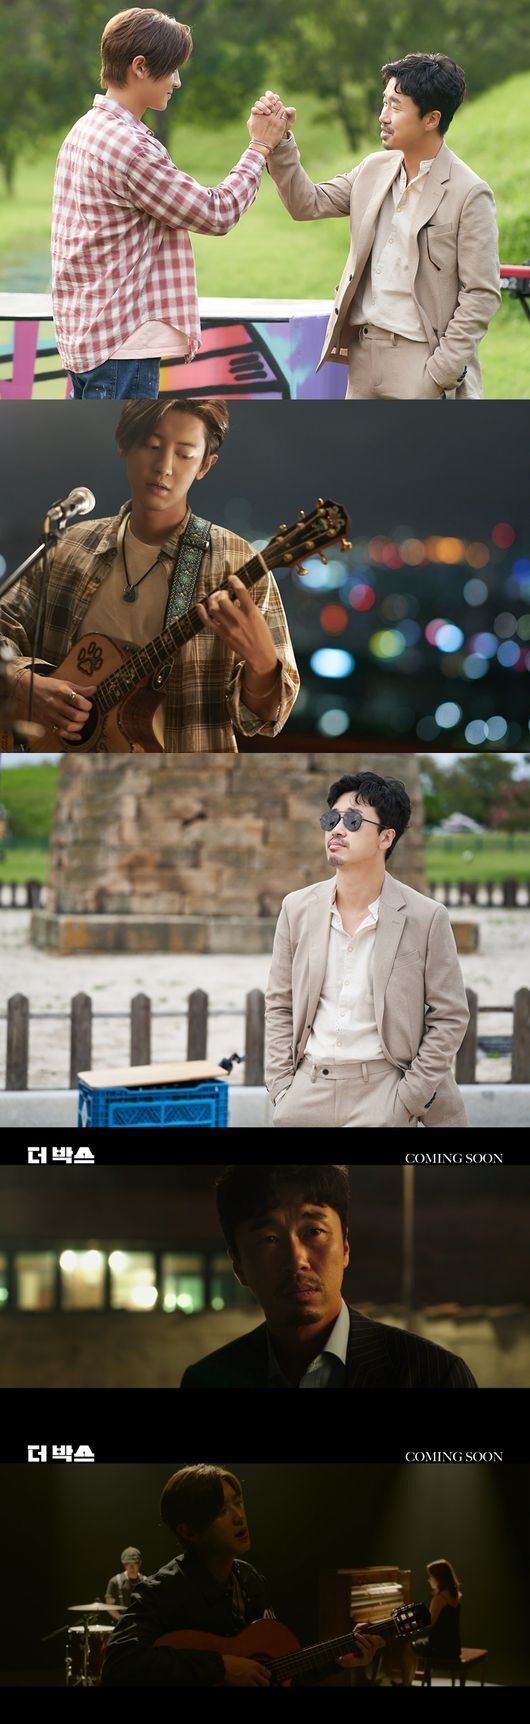 Music buster The Box (written director Yang Jung-woong, production film take, and distribution (Cinefill Woon) to be shown by Chanyeol and Procurement exchange confirmed the release and released the launch clip and steel.In the spring when the spring wind blows in earnest, there is already interest in the movie that will satisfy the audiences five senses.It is the music buster The Box starring Chanyeol and Procurement exchange.Ji Hoon (Chanyeol), who can sing only if he uses a box, and Minsoo, a producer of Pomseng Pomsa, whose success is the most important, released a lounge clip and still cut that will show the atmosphere of the work.The launch clips and stills show the singer Chanyeol as an actor Chanyeol, as well as the perfect chemistry with the Procurement exchange.First, the launch clip, which expresses the world-famous pop, Billy Eiliss Bad Guy, in a stylish way with the guitar playing, makes the overall movie look good despite the brief scene.Especially, this scene is the first scene where Chanyeol and Procurement exchange meet in the movie.In addition, Chanyeol seems to predict the perfect synchro rate with Ji Hoon in The Box, which stimulates curiosity.In the still cut, such as the launch clip, it shows the charm of the genre of music film.In the appearance of Chanyeol playing guitar in the background of beautiful night view, the melody seems to be heard and the cut of Procurement exchange staring at a distant place with sunglasses shows the character of the important character even if the soon death of Minsu he has Acted.Chanyeol and Procurement Exchanges The Box will be released in the spring, which will show the perfect bus king road movie by re-creating the first and world-class music on the screen.cinefilun